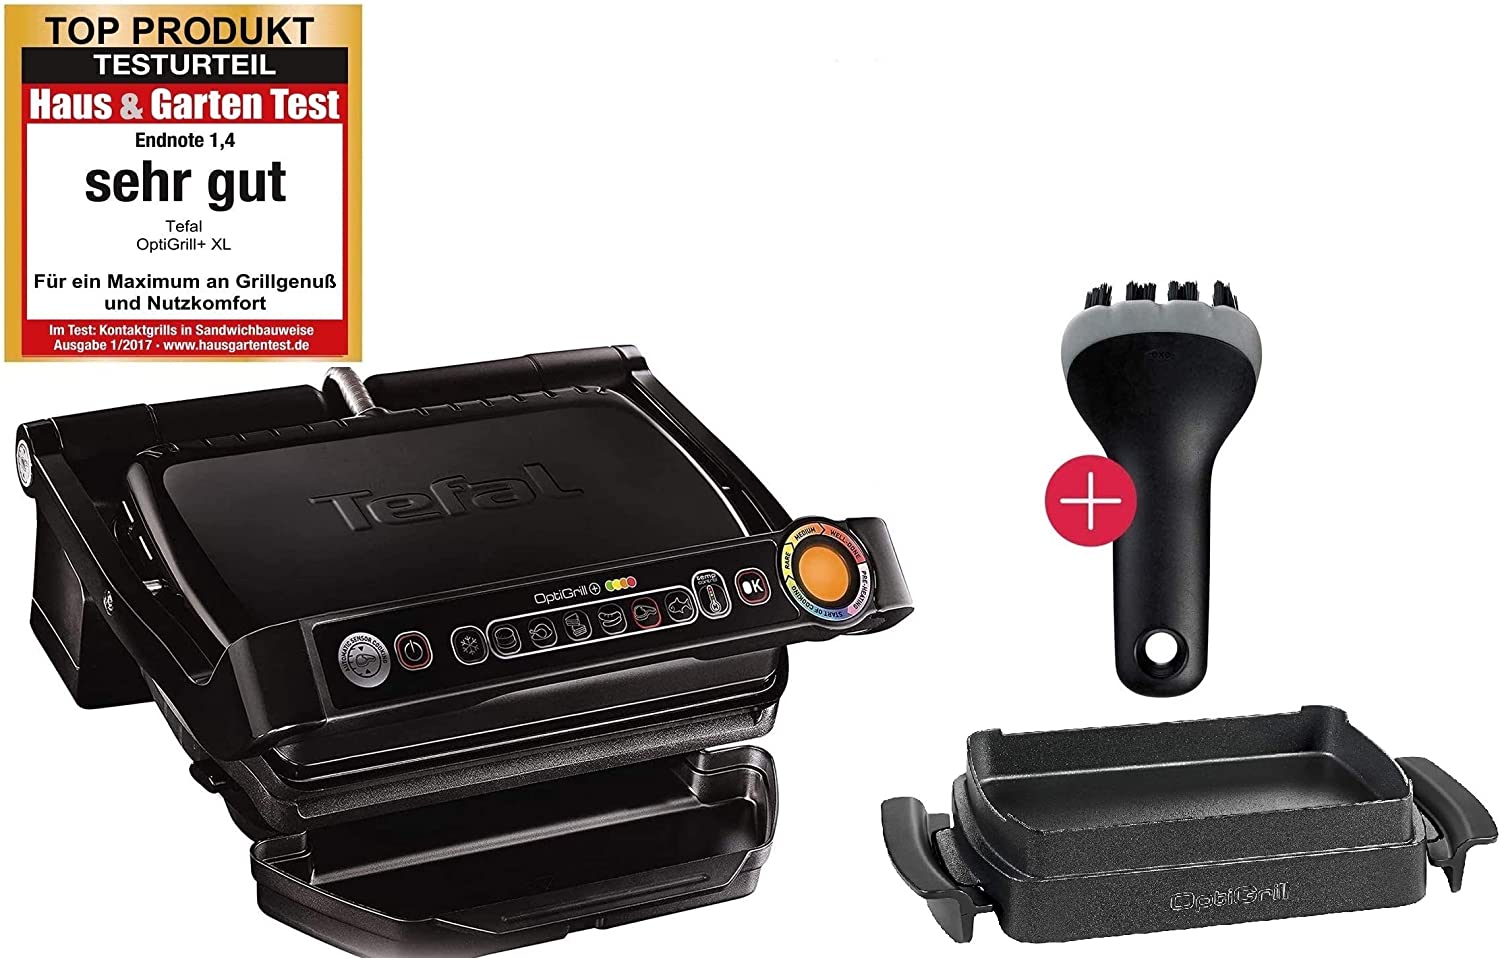 Tefal OptiGrill+ with a smart contact grill